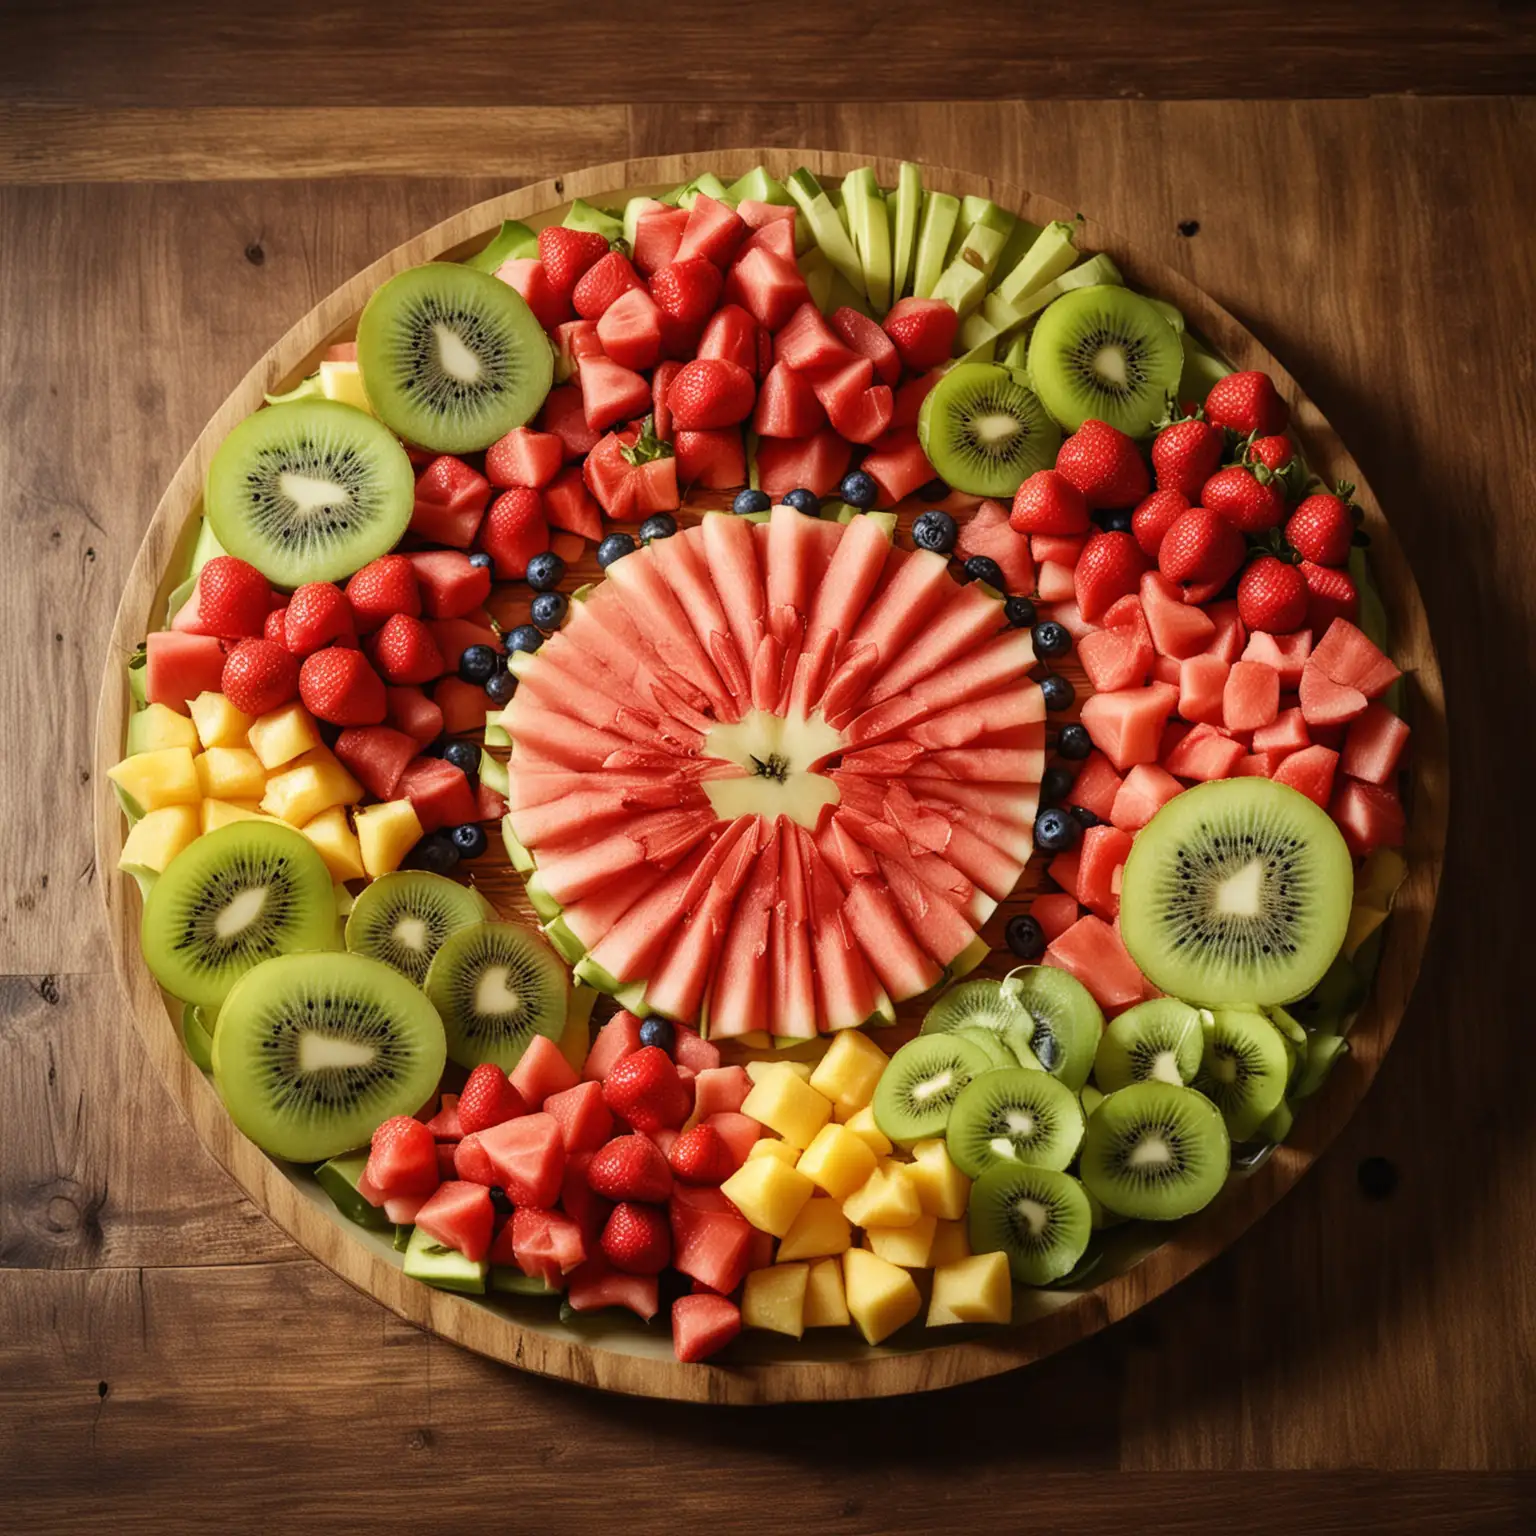 ```
‏A photographic style of a plate of professionally cut fruits, featuring vibrant colors of watermelon, kiwi, pineapple, and strawberries, arranged in an artistic circular pattern on the plate. The plate is placed on a rustic wooden table. The background includes a blurred kitchen scene with soft morning light streaming through a window. Colors are vivid with natural sunlight highlighting the fruits, creating dynamic shadows. Created Using: Canon EOS R5, rule of thirds, culinary art photography, soft-focus background, HDR technique, natural light setup, fruit carving expertise, high-resolution capture, hd quality, natural look
```